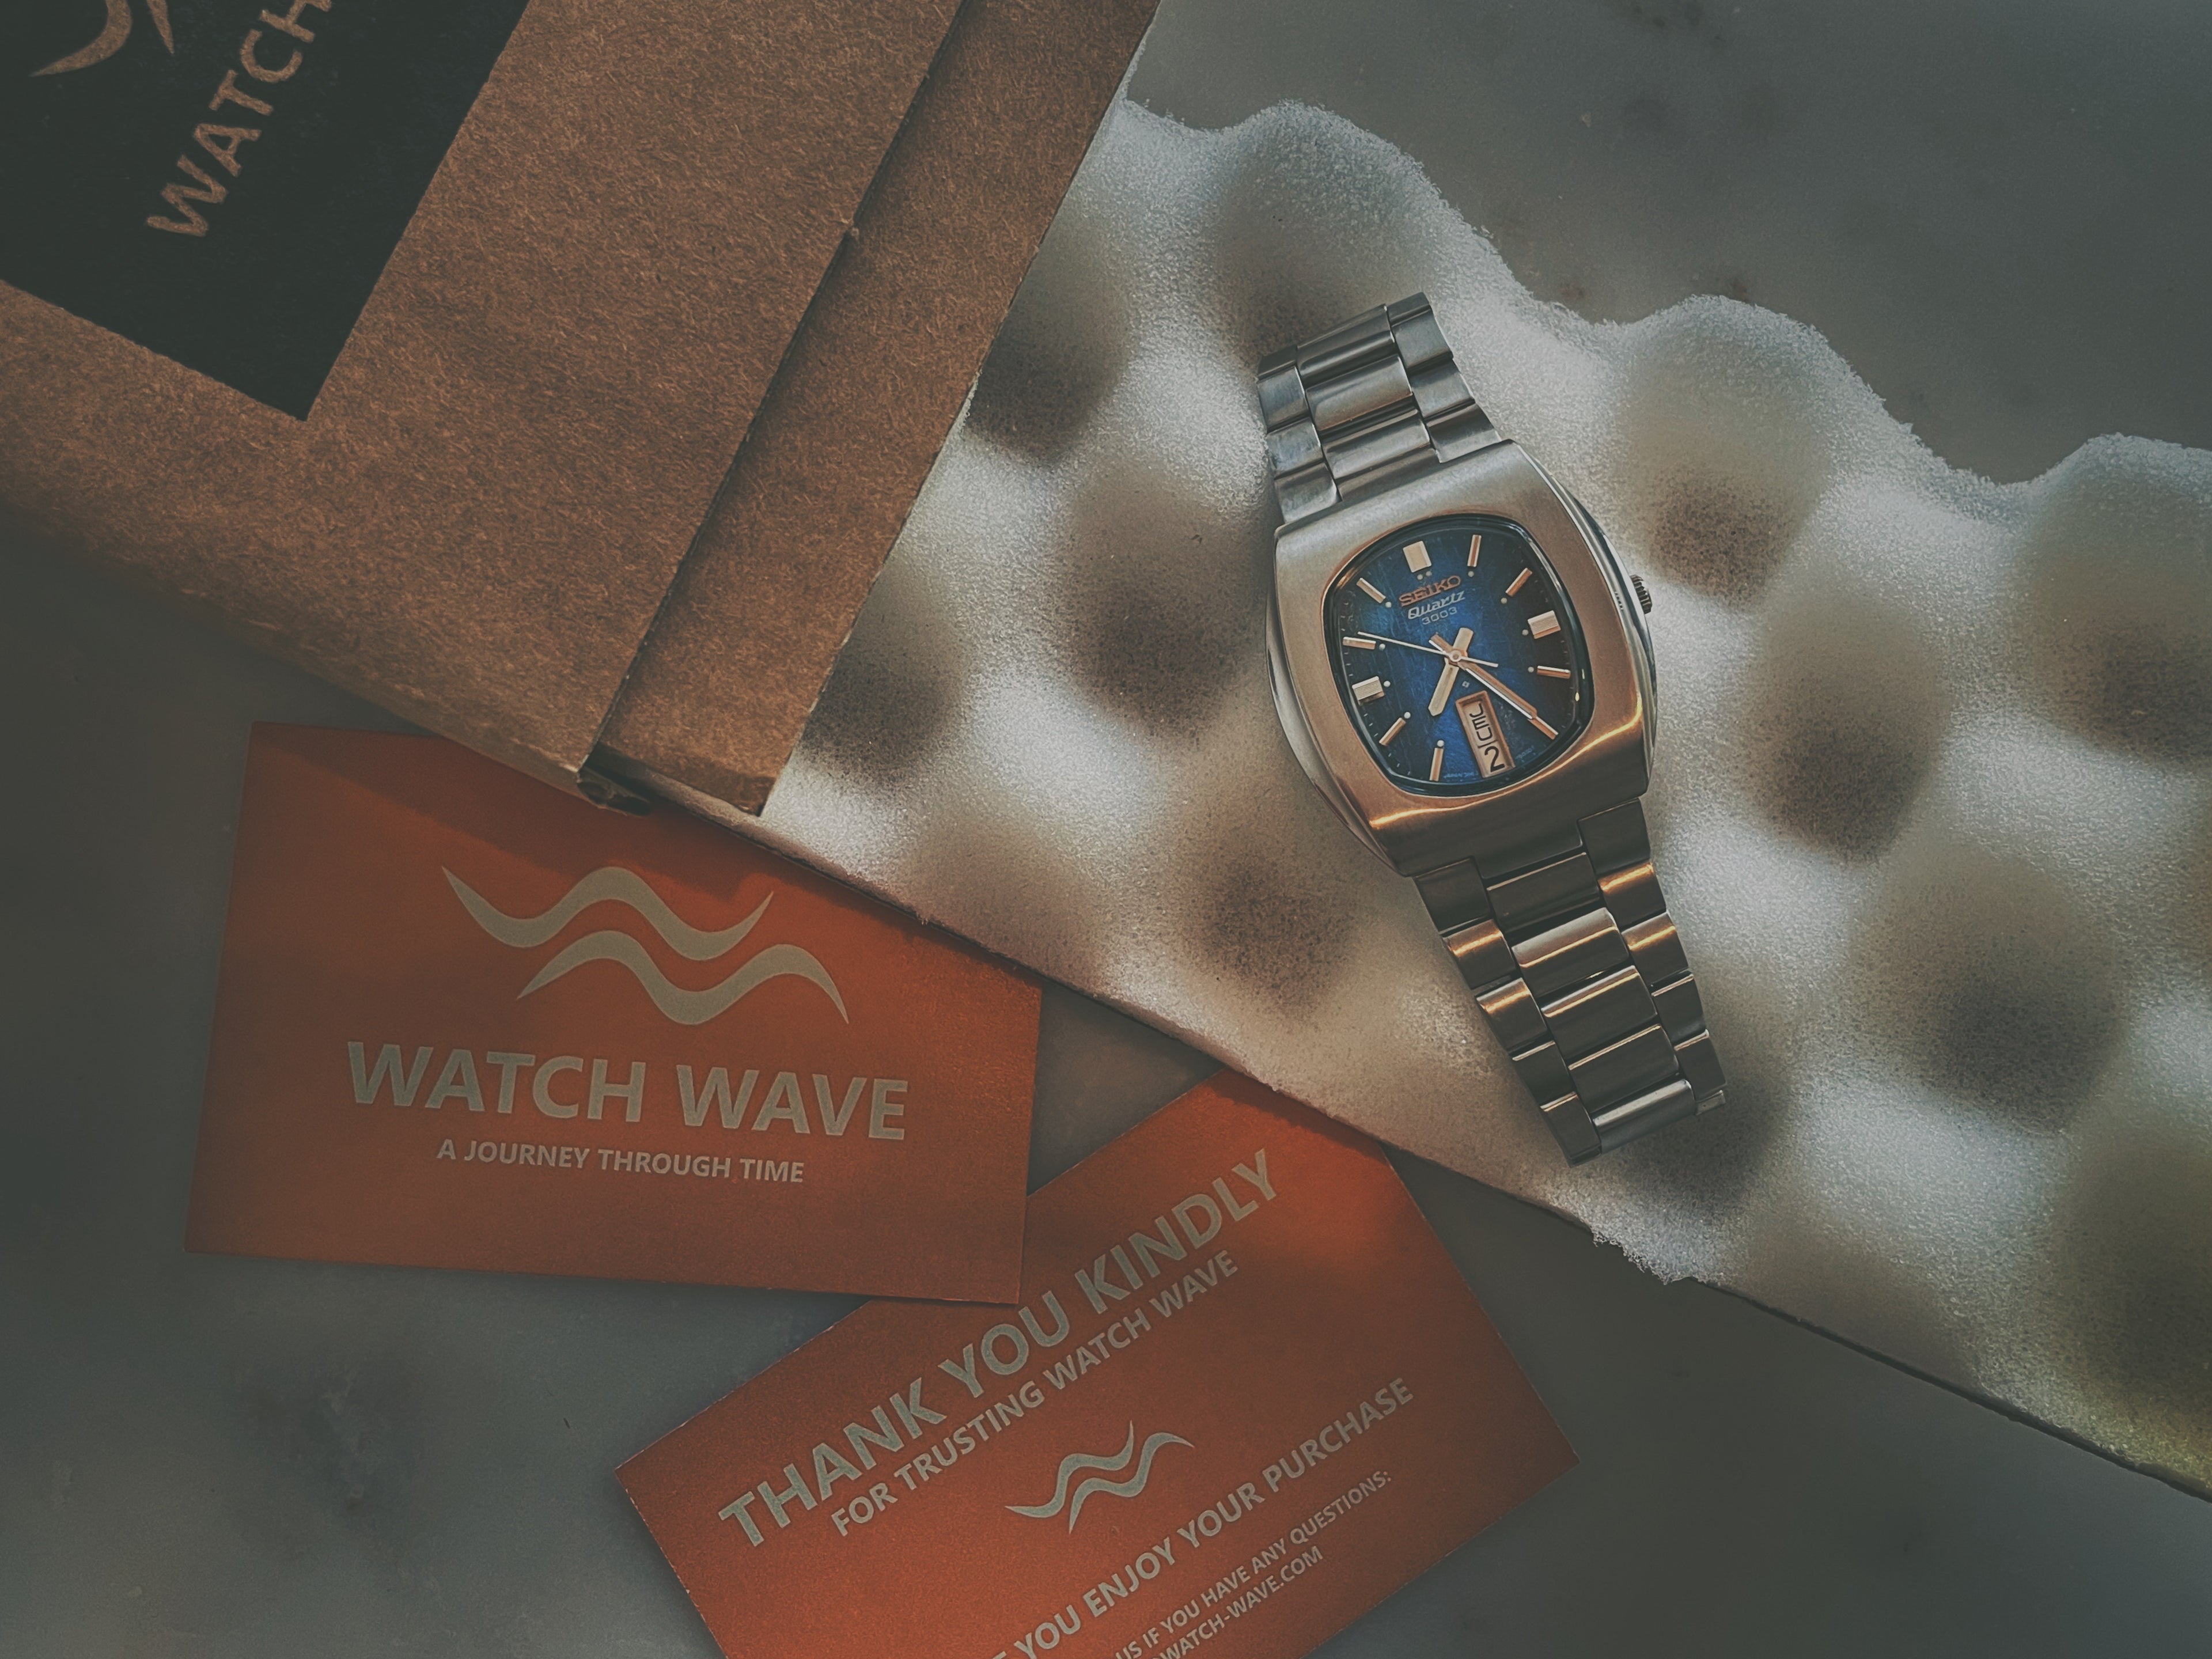 Watch with shipment box and business card